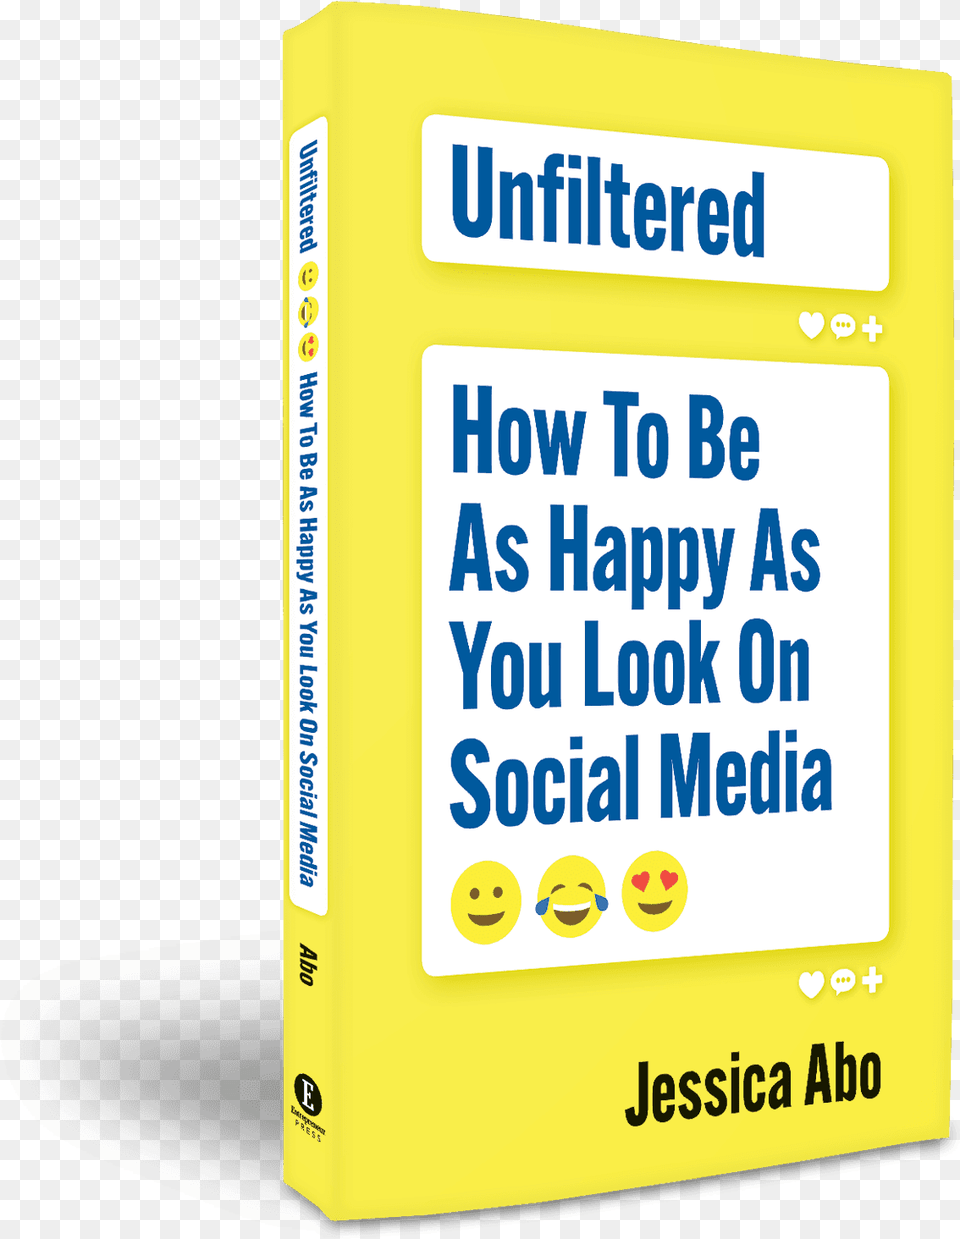 Unfiltered How To Be As Happy As You Look On Social, File Binder Free Png Download